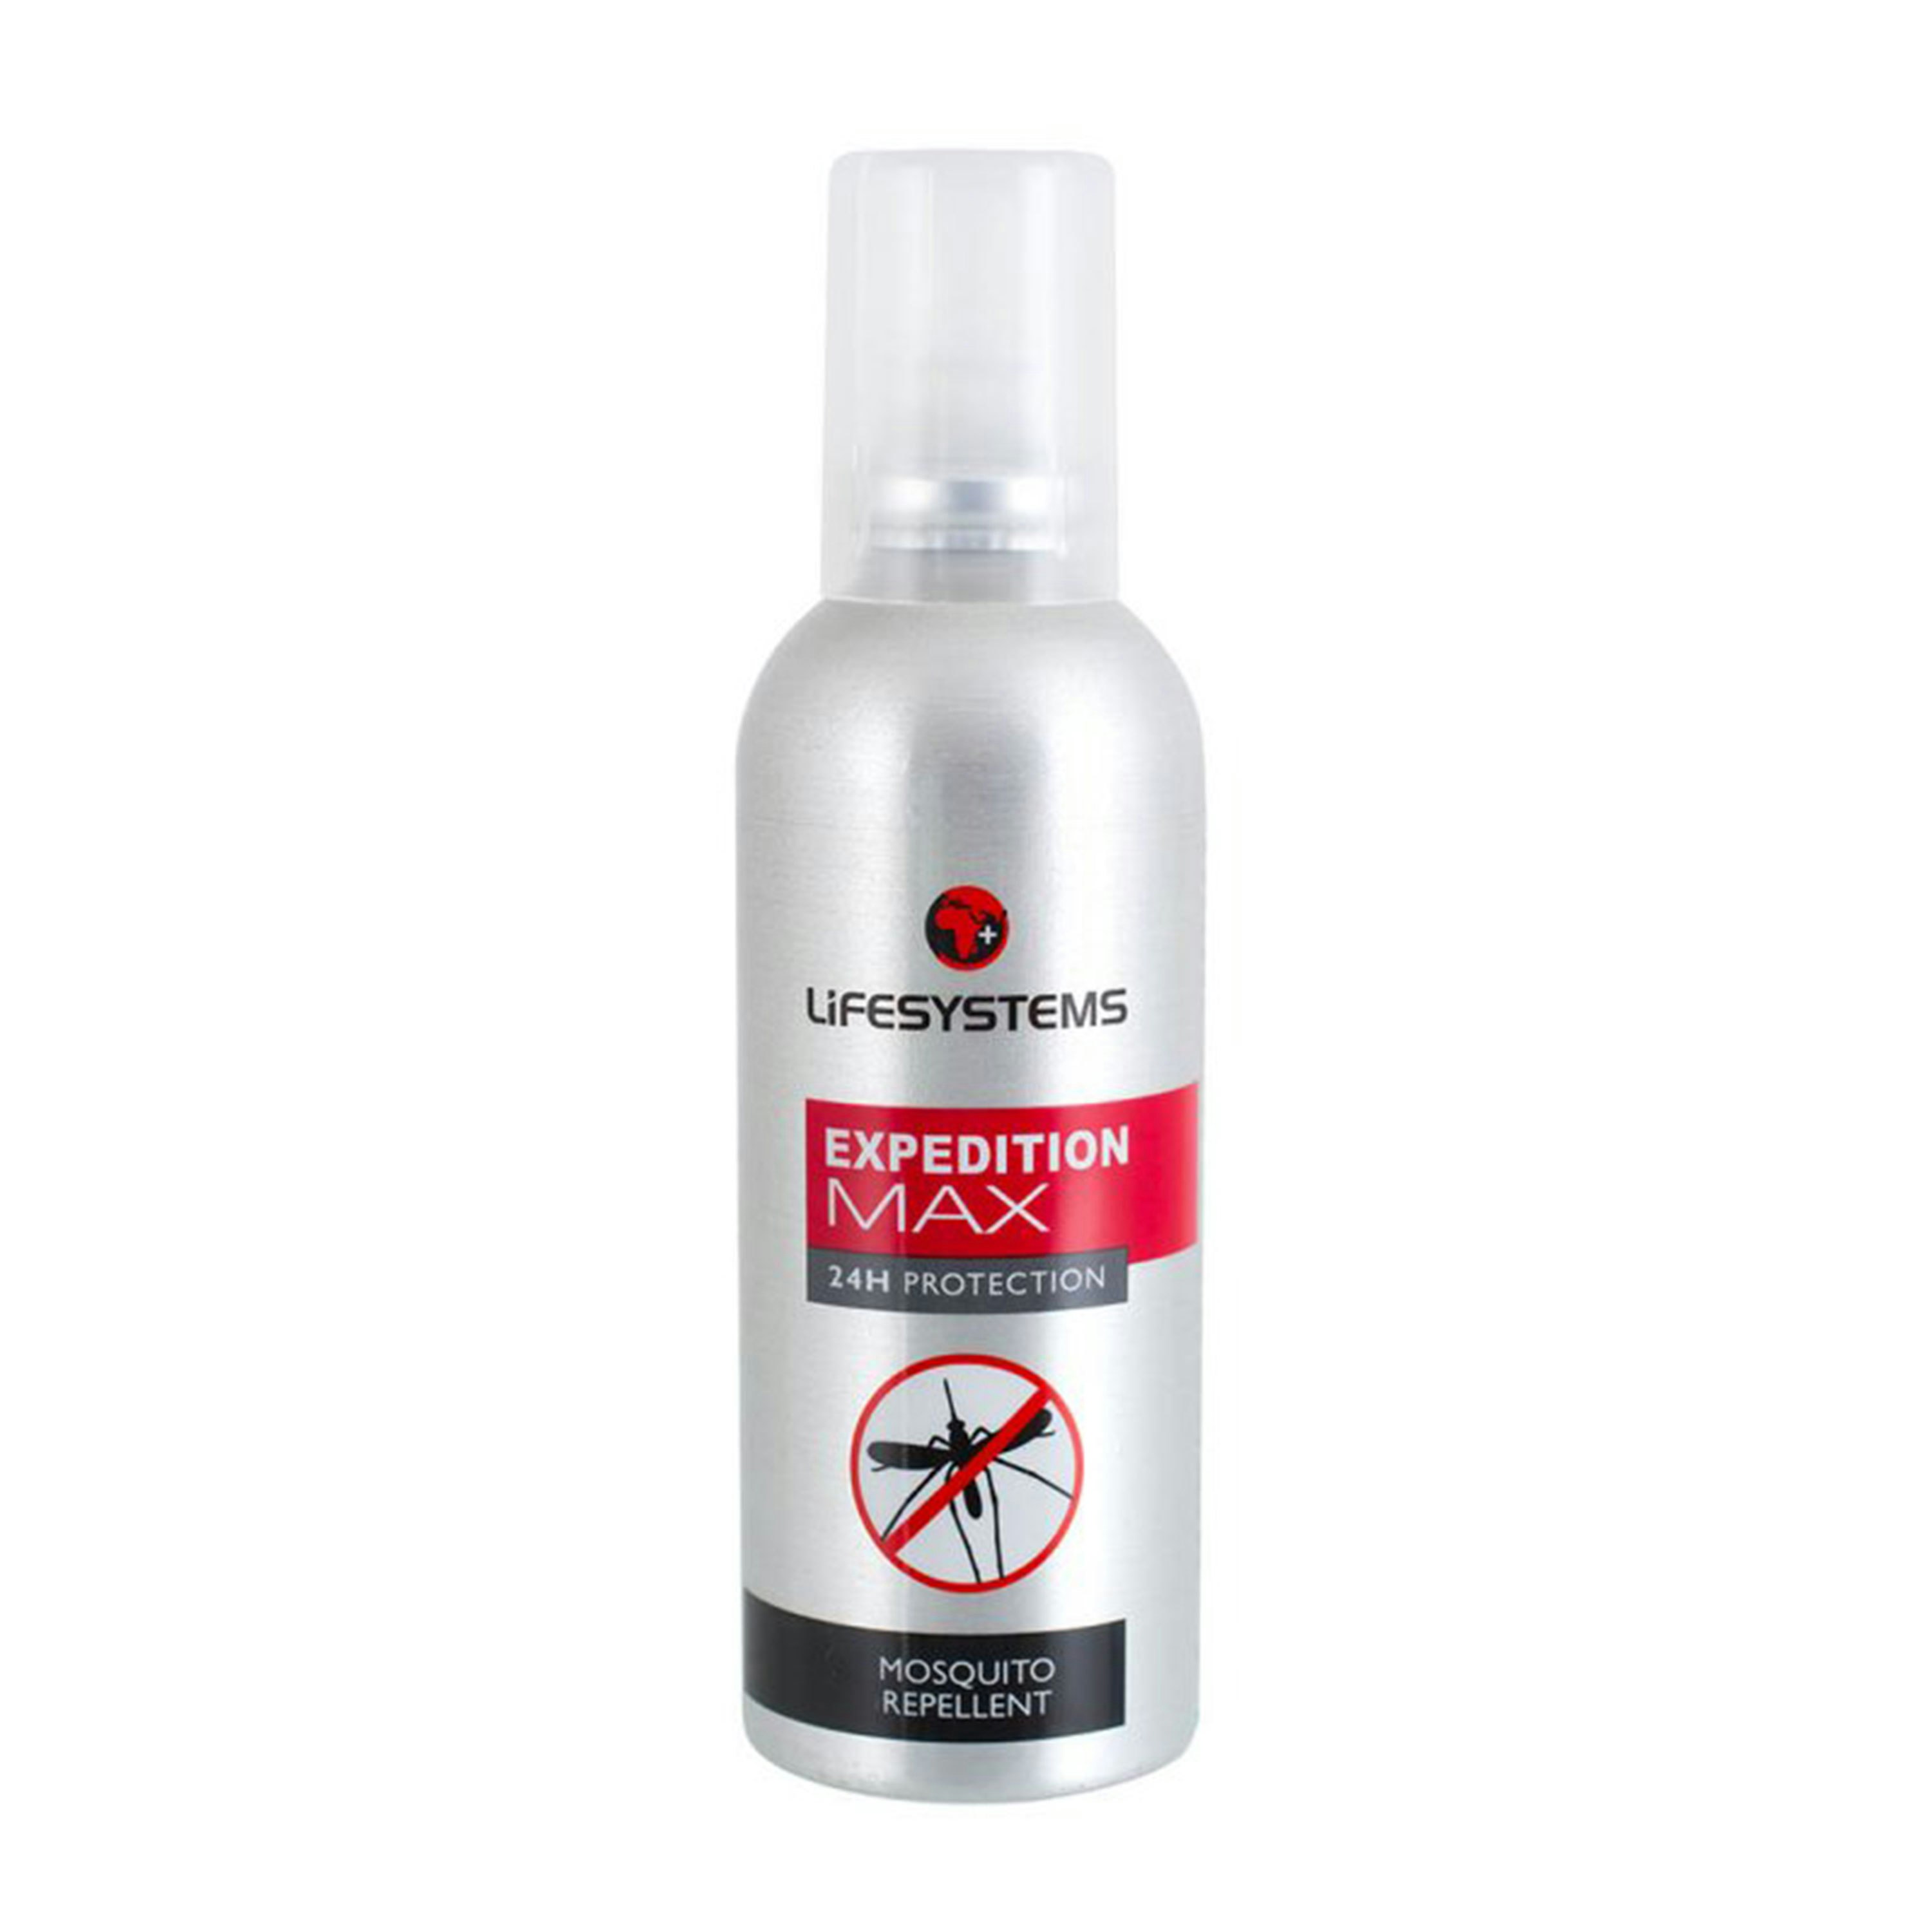 Lifesystems(r) Expedition Max DEET Mosquito Repellent 100ml